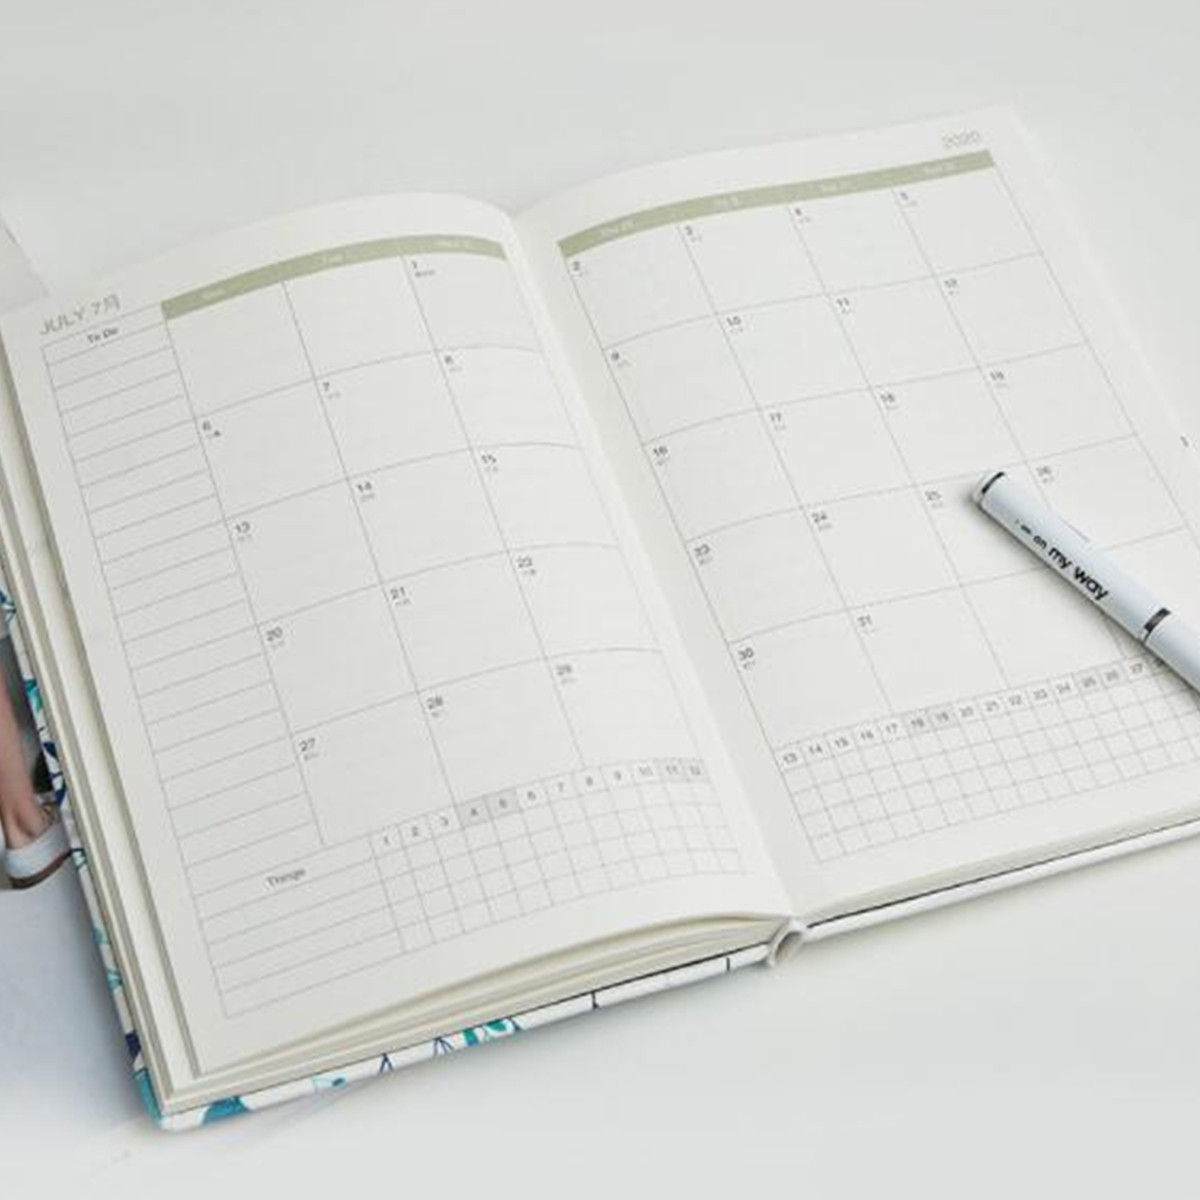 2019-2020-Weekly-Monthly-Agenda-Planner-Monthly-Weekly-Plan-Portable-Notebook-Cute-Diary-Flower-Sche-1530952-5